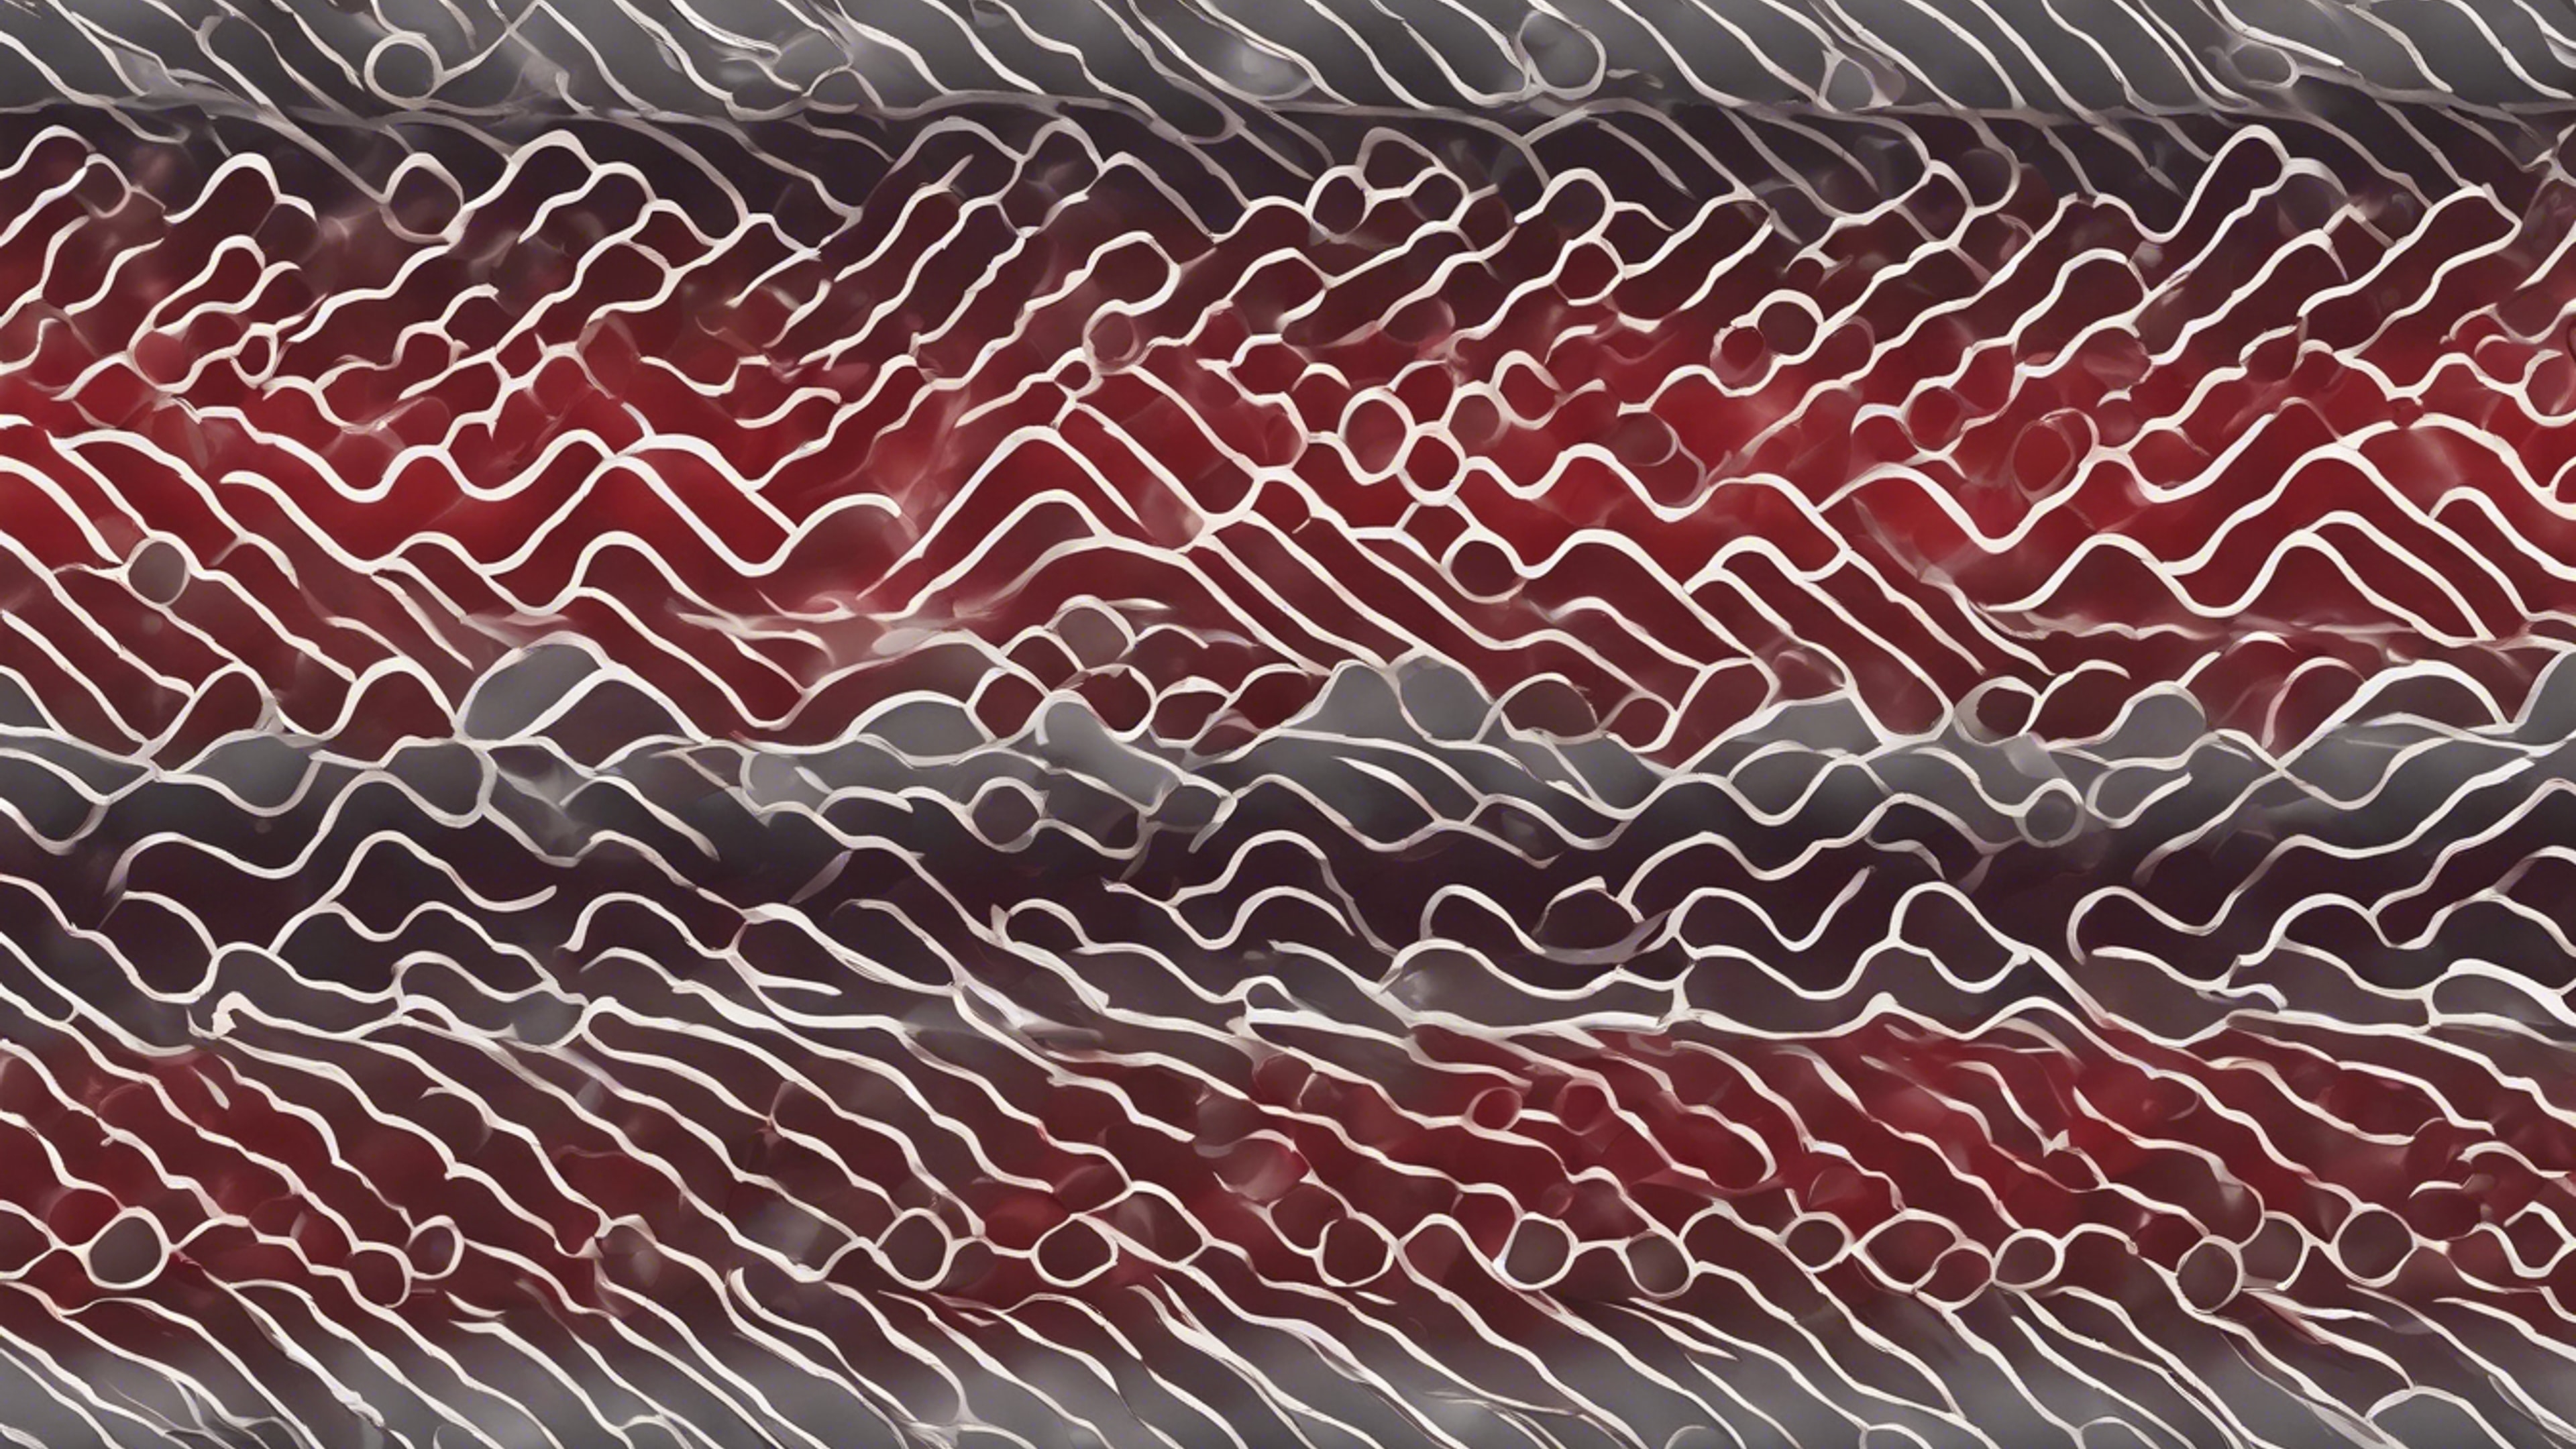 A mesmerizing seamless pattern with gradient waves of rich red and sleek gray.壁紙[ac291ae0b2244bb88802]